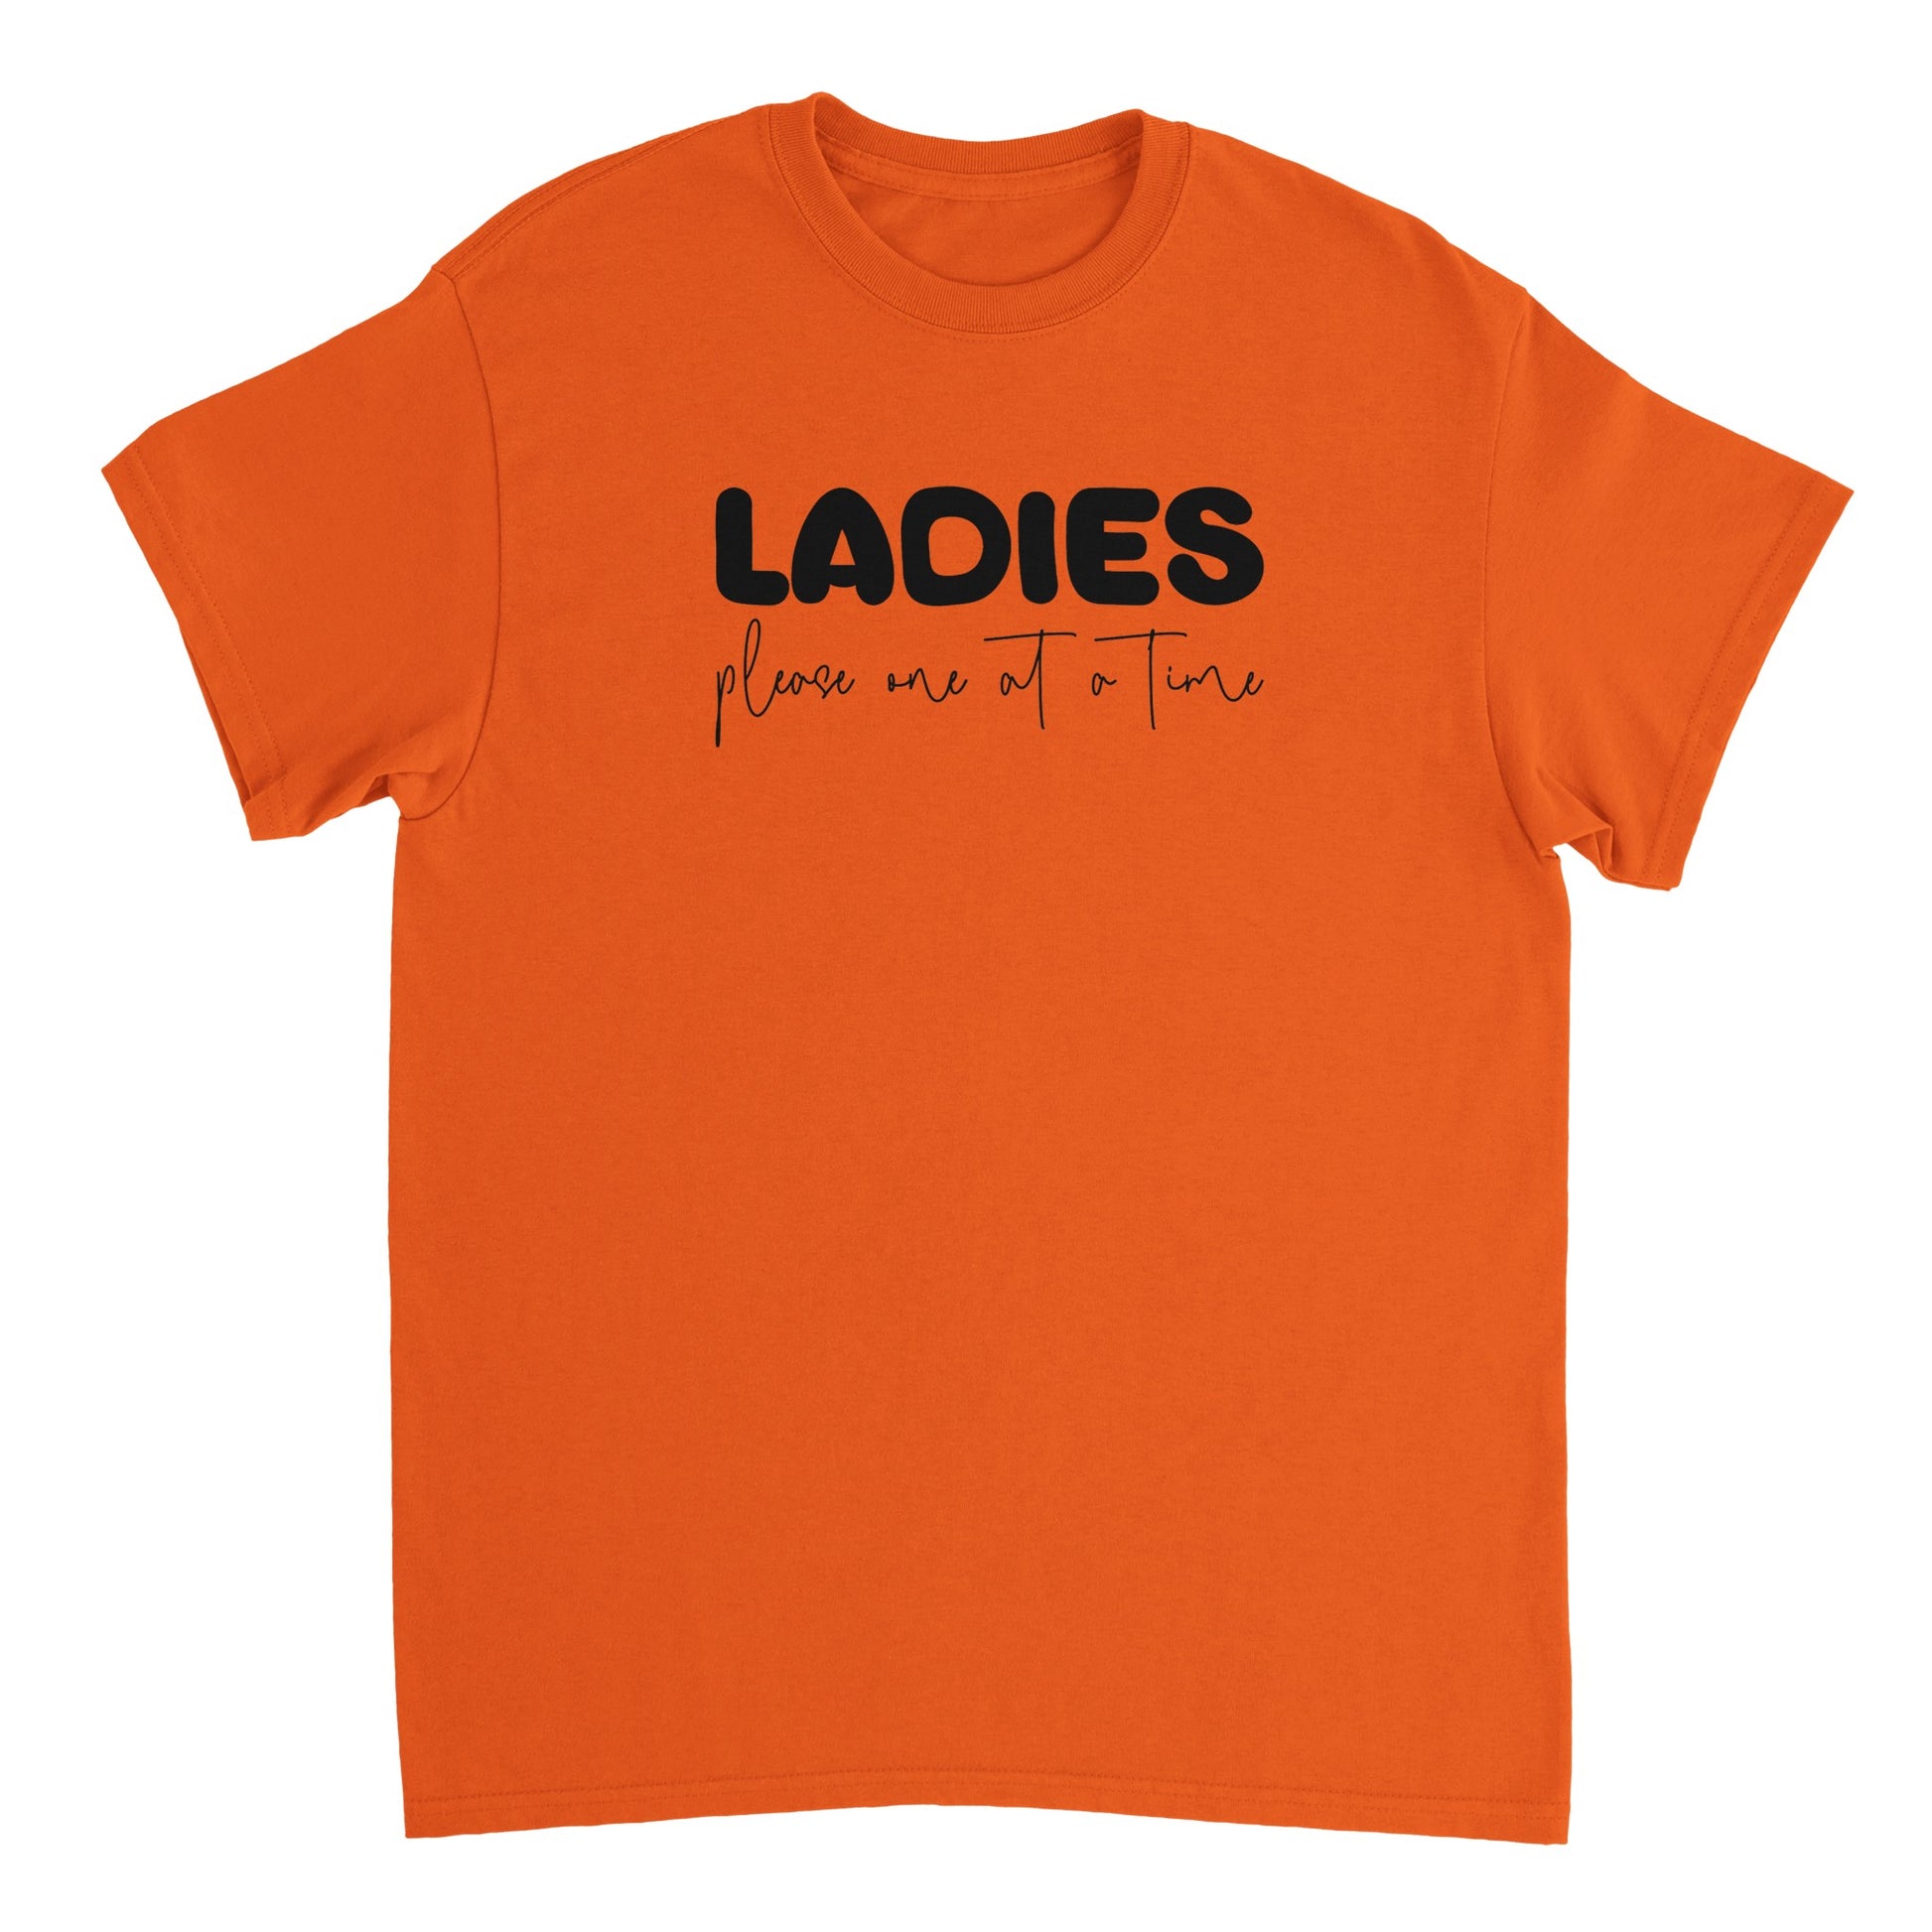 Ladies Please T-shirt - Mister Snarky's